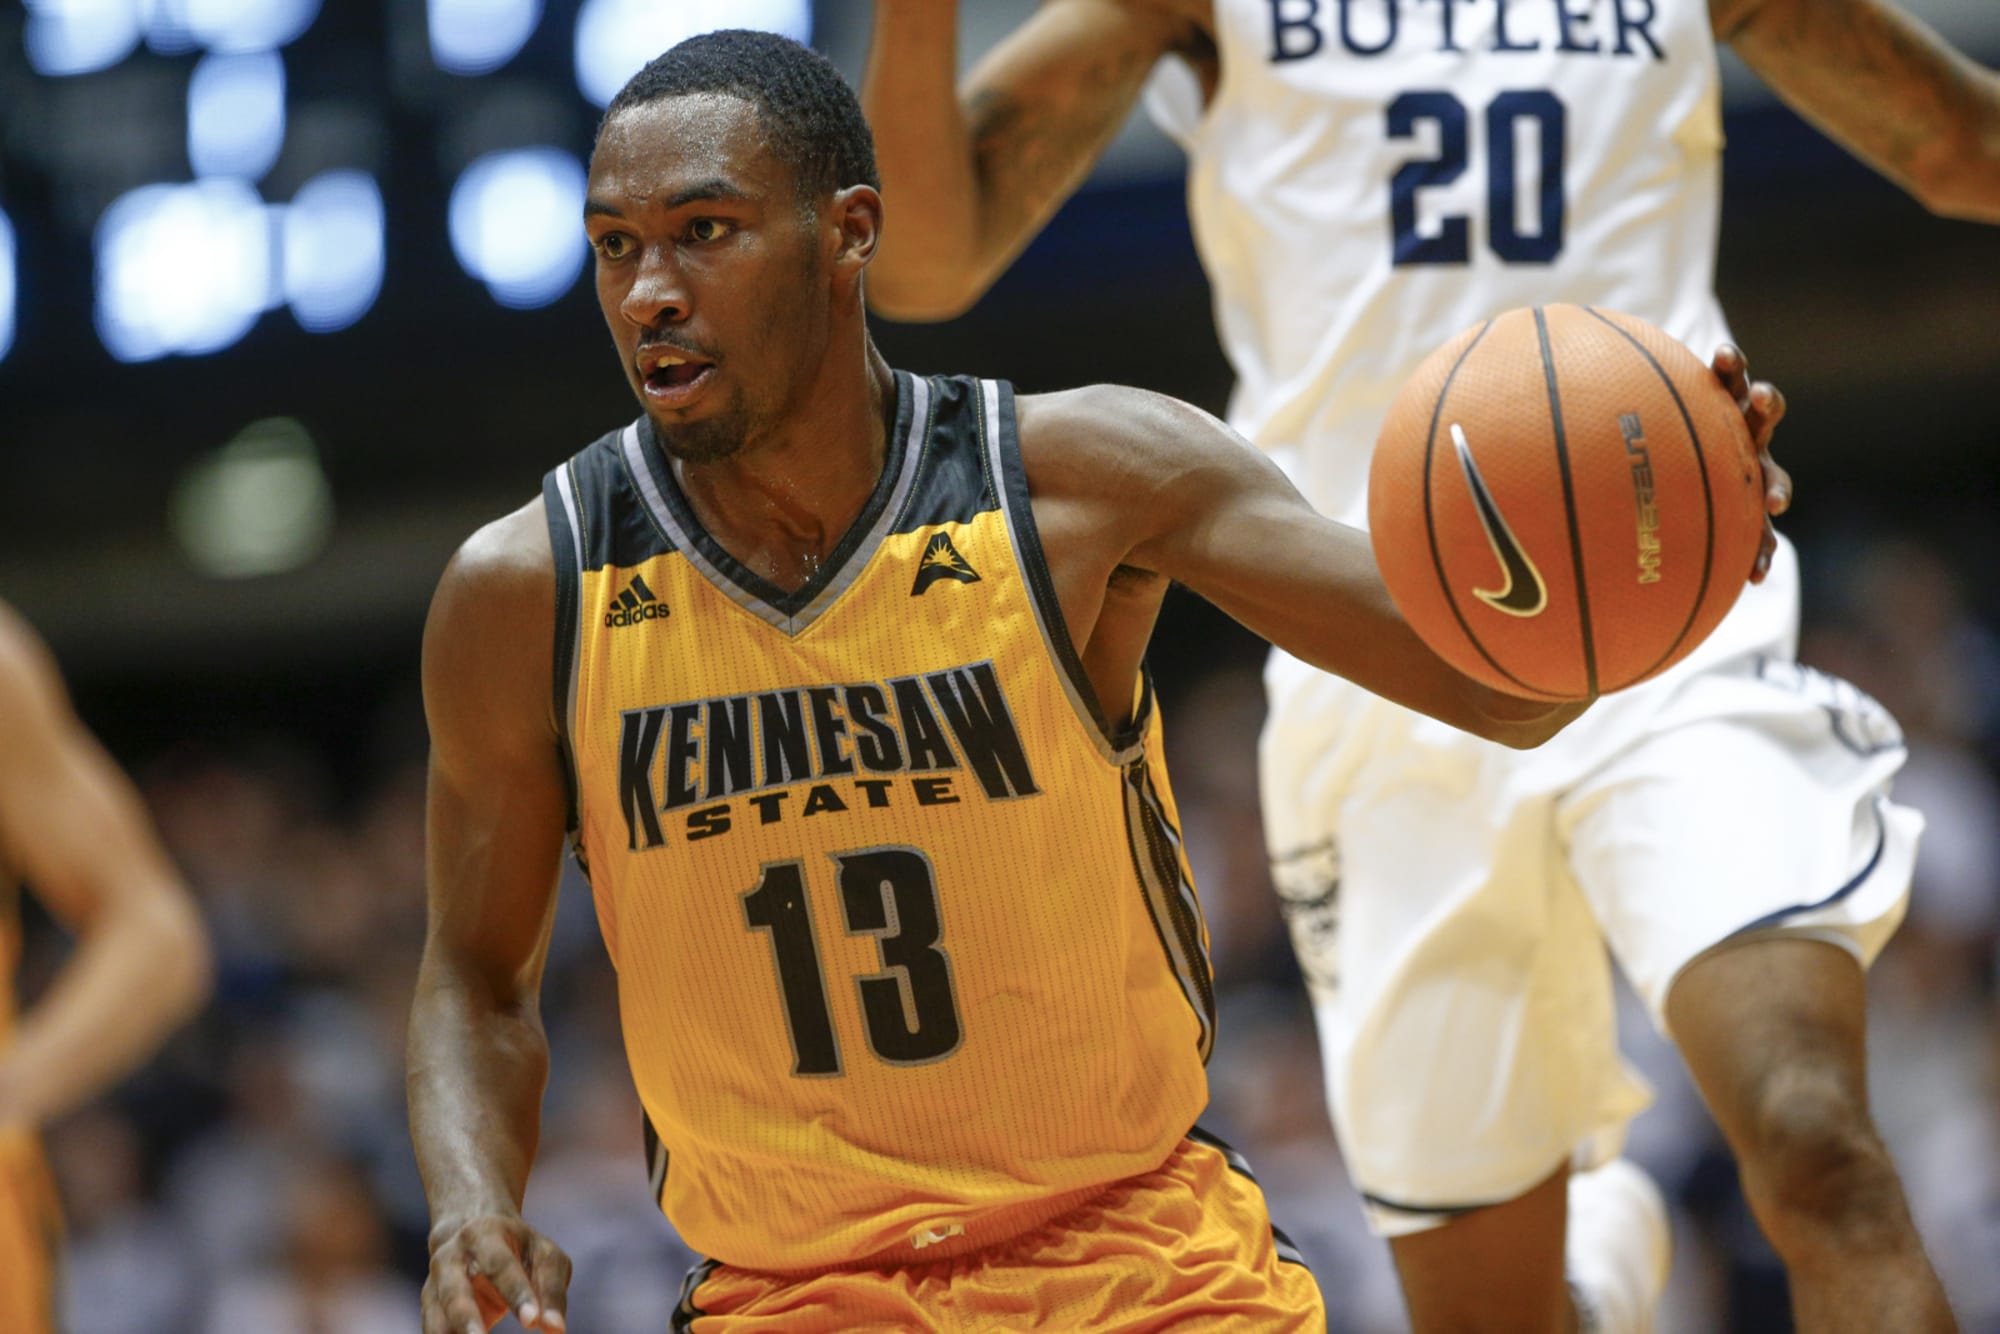 Kennesaw State Basketball: What to expect from the Owls in 2020-21?